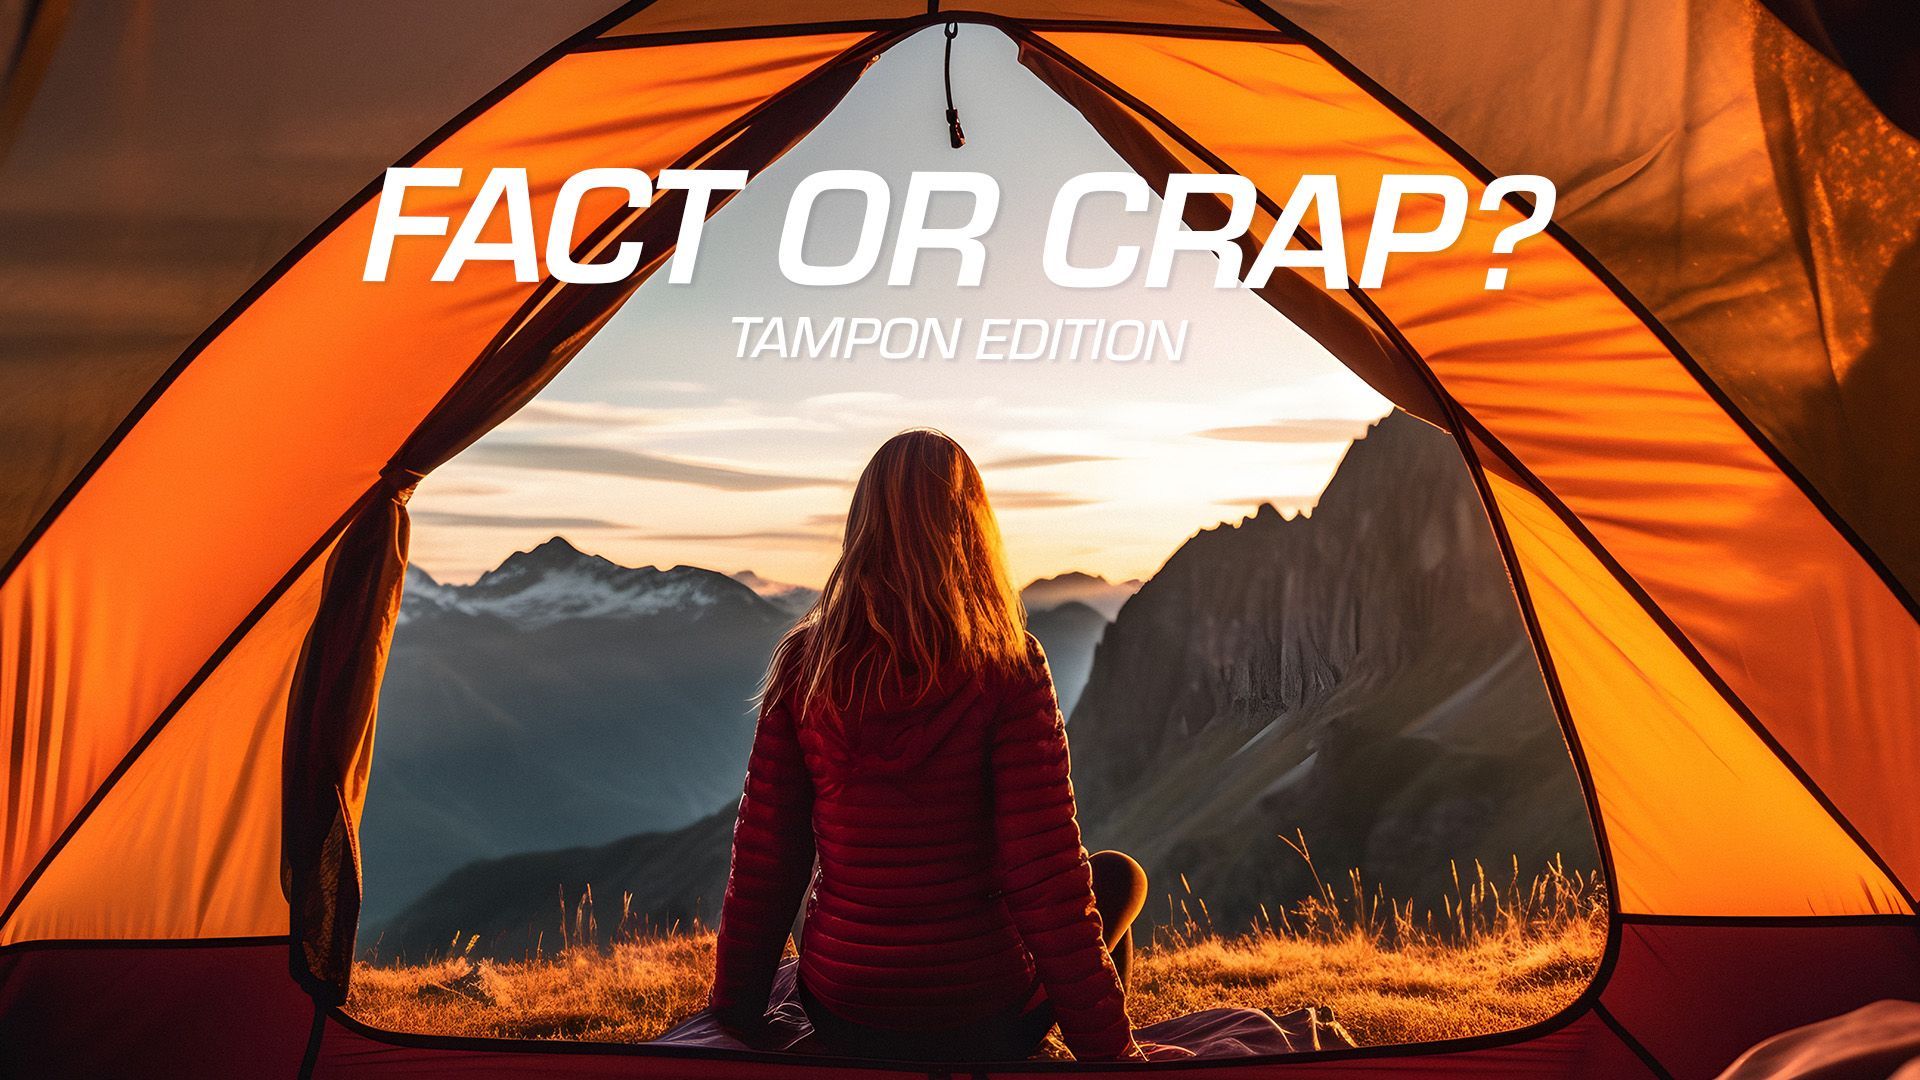 Fact or Crap? Tampon Edition